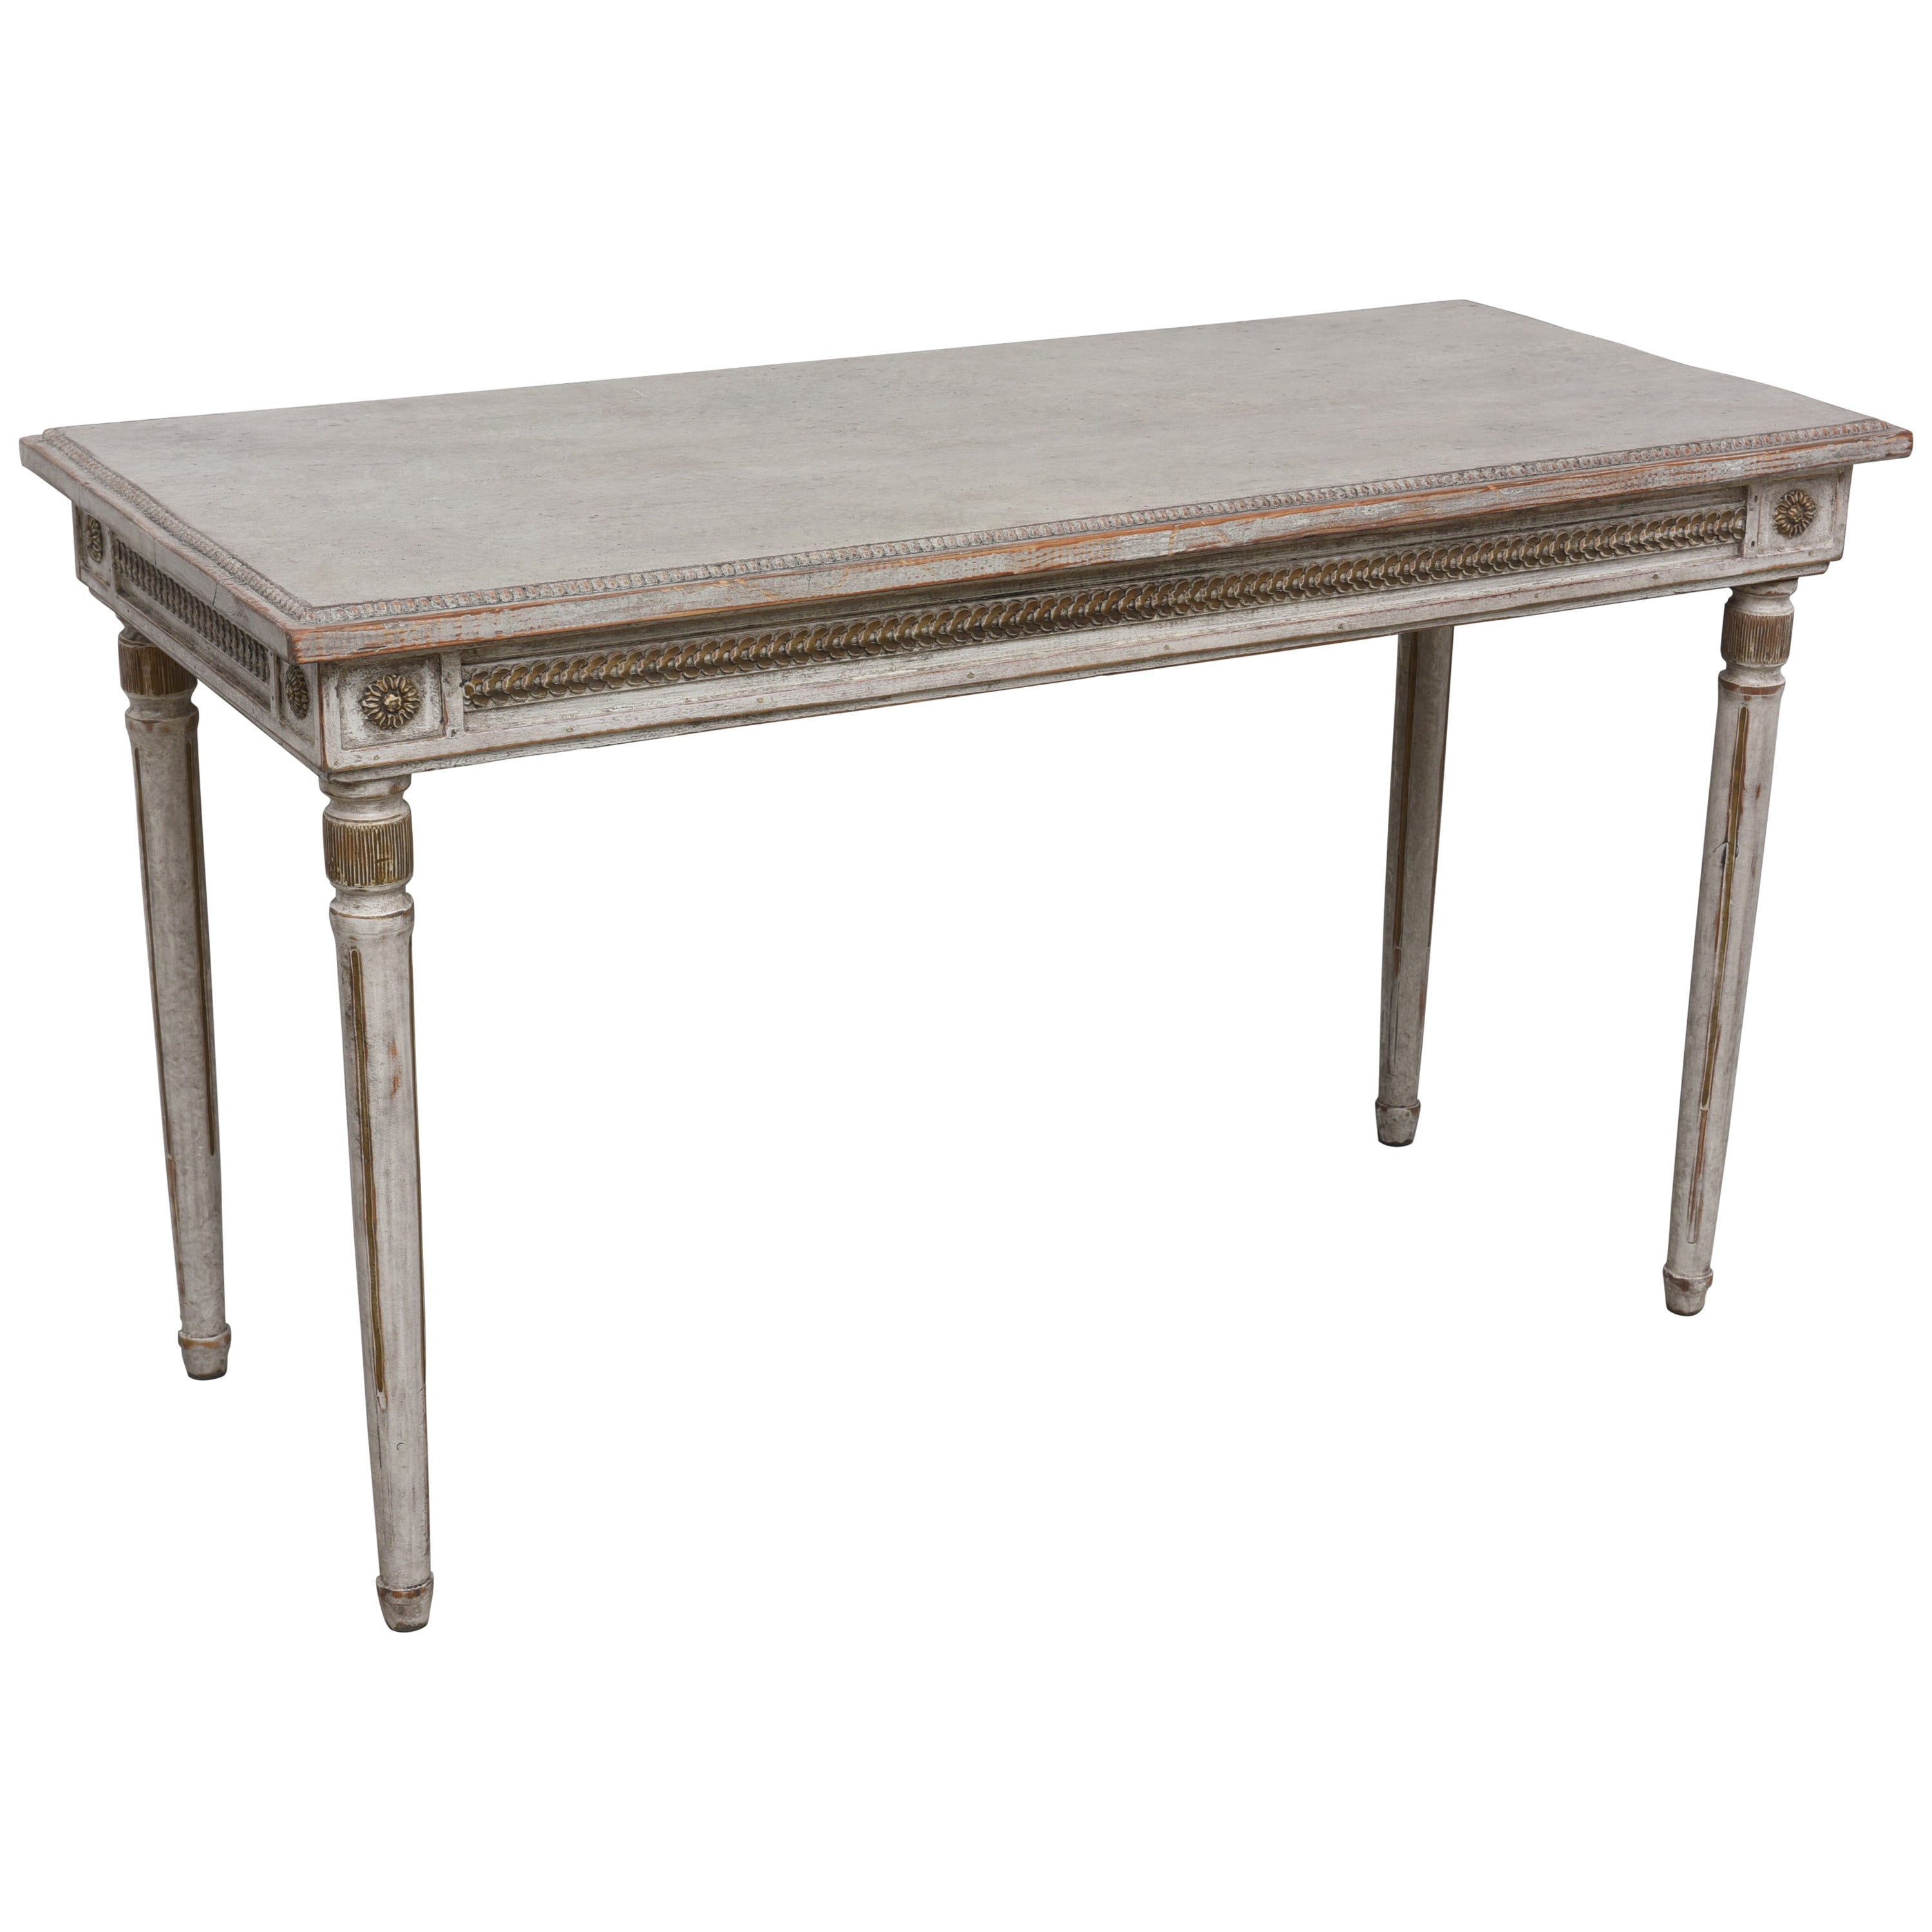 Painted Antique Swedish Console Table, Mid-19th Century